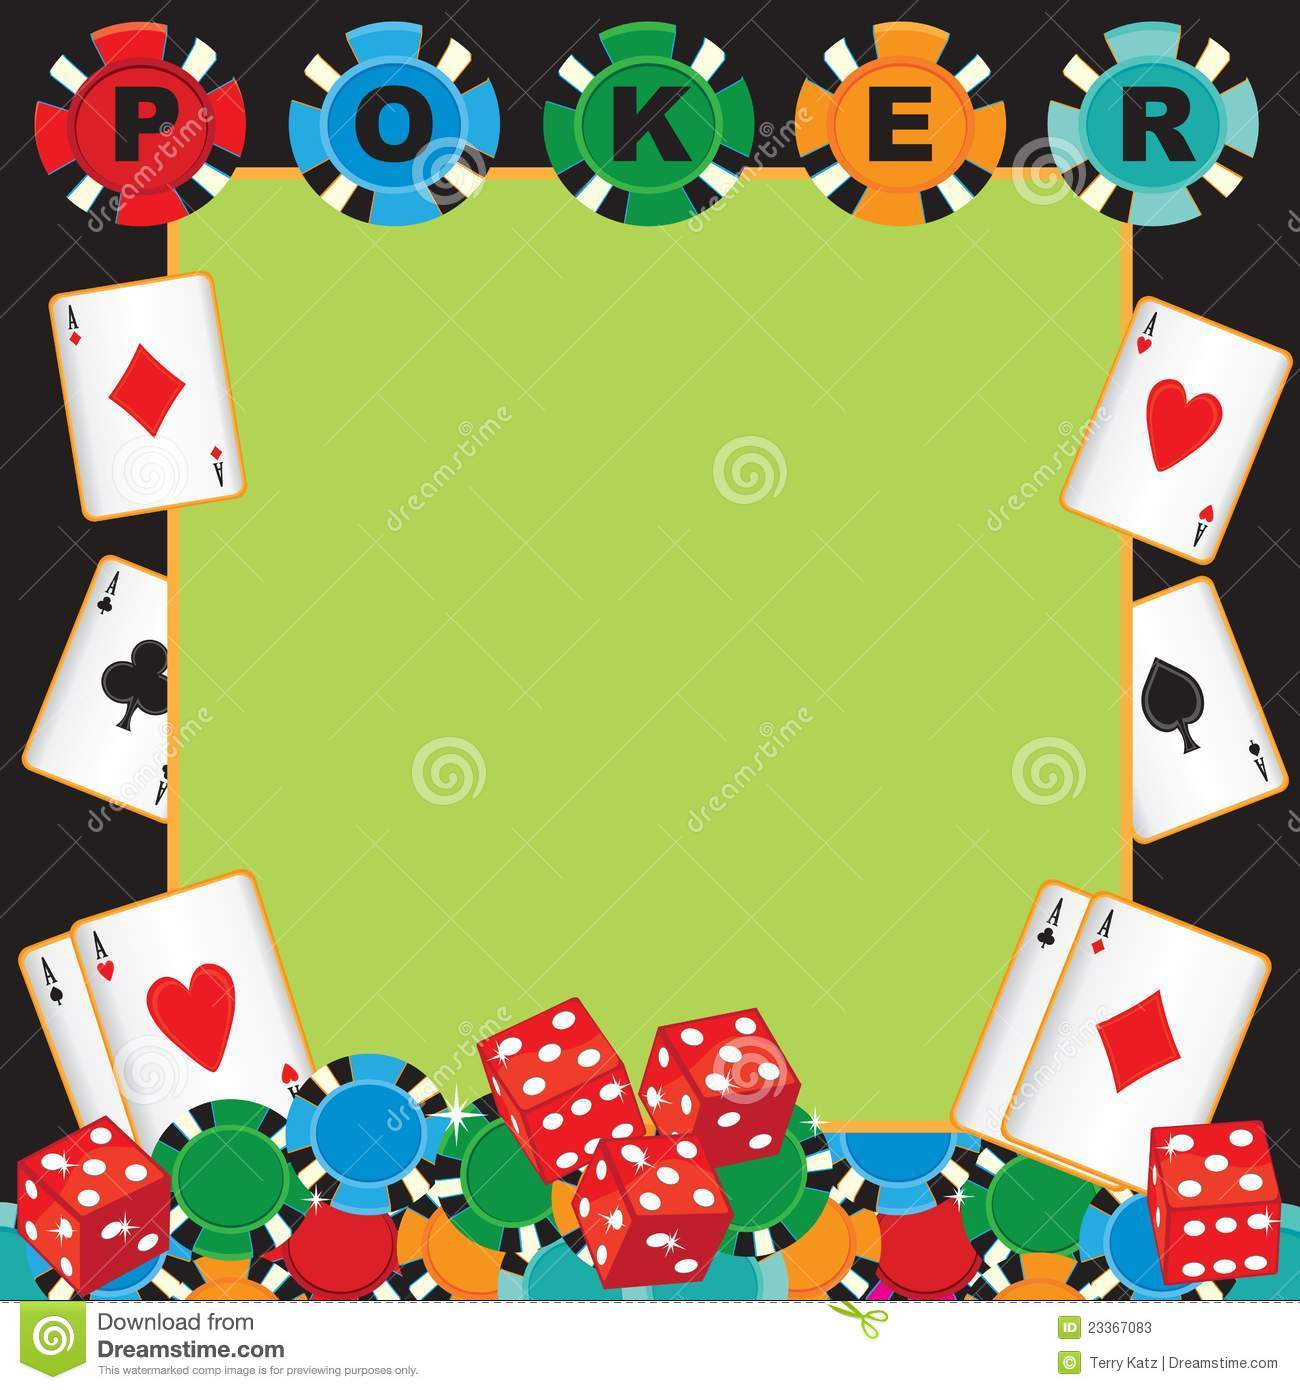 Poker Party Gambling Invitation Stock Vector Illustration Of within measurements 1300 X 1390